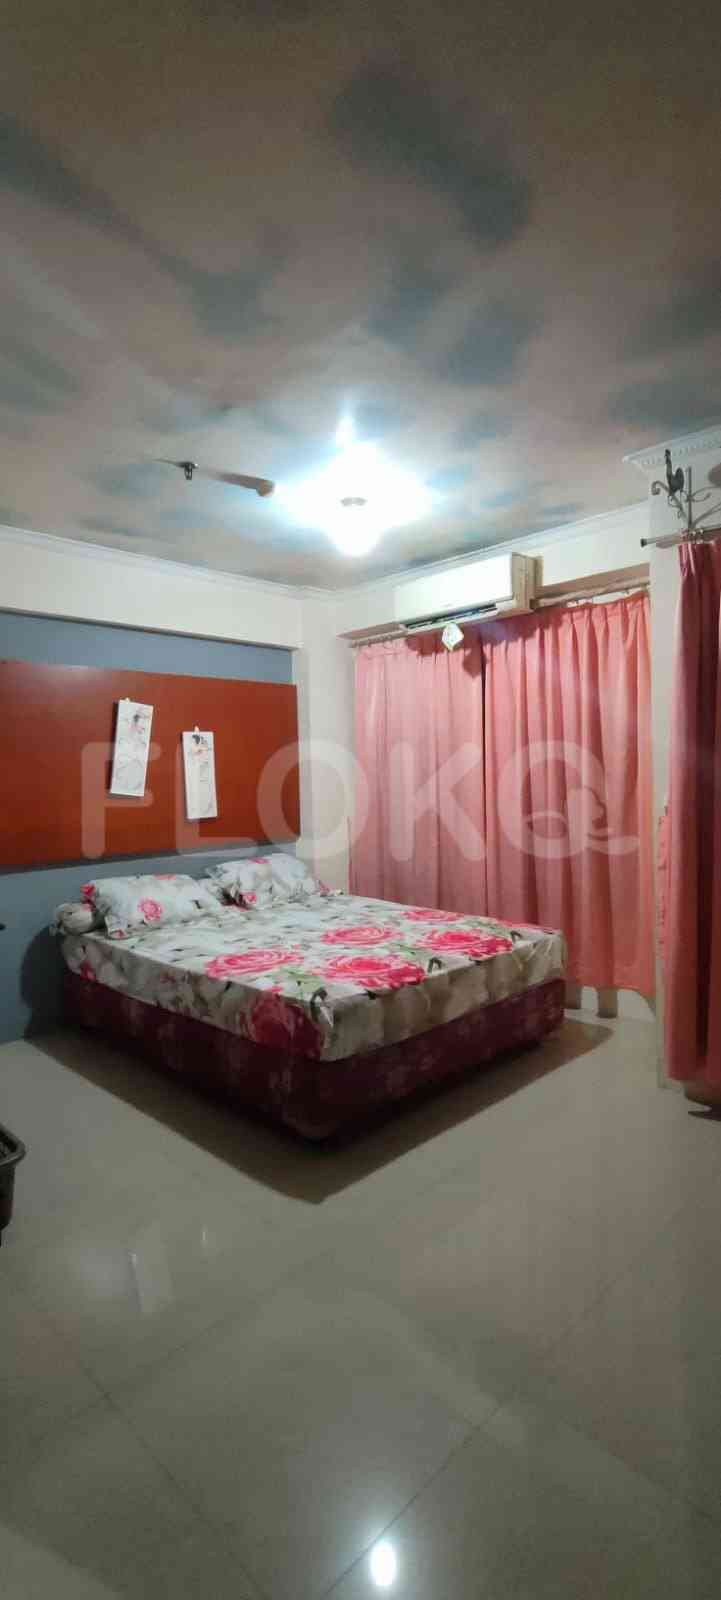 1 Bedroom on 21st Floor for Rent in Sentra Timur Residence - fcab27 2